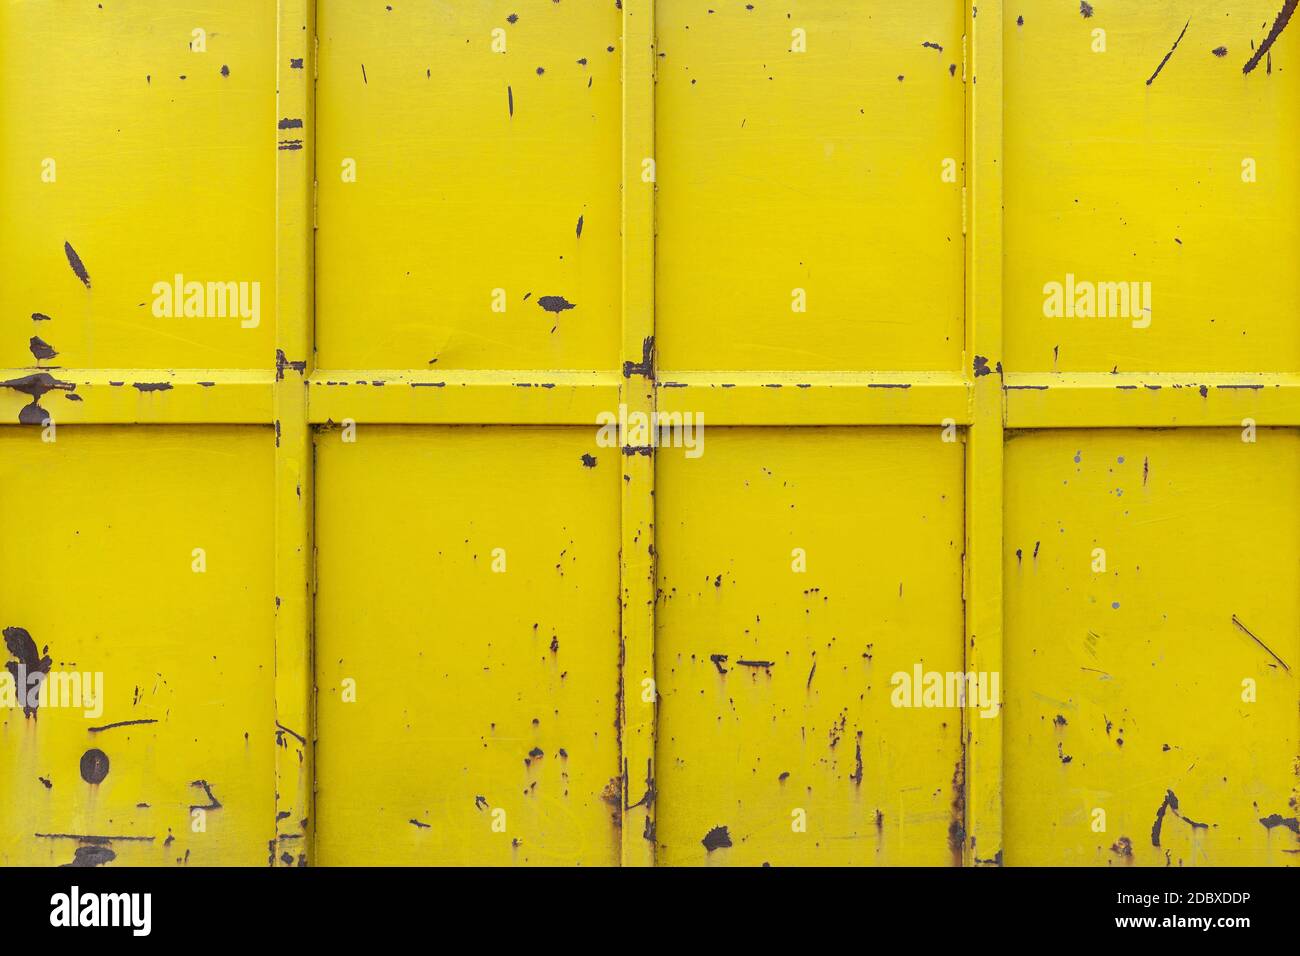 Exterior wall of an old yellow freight container Stock Photo